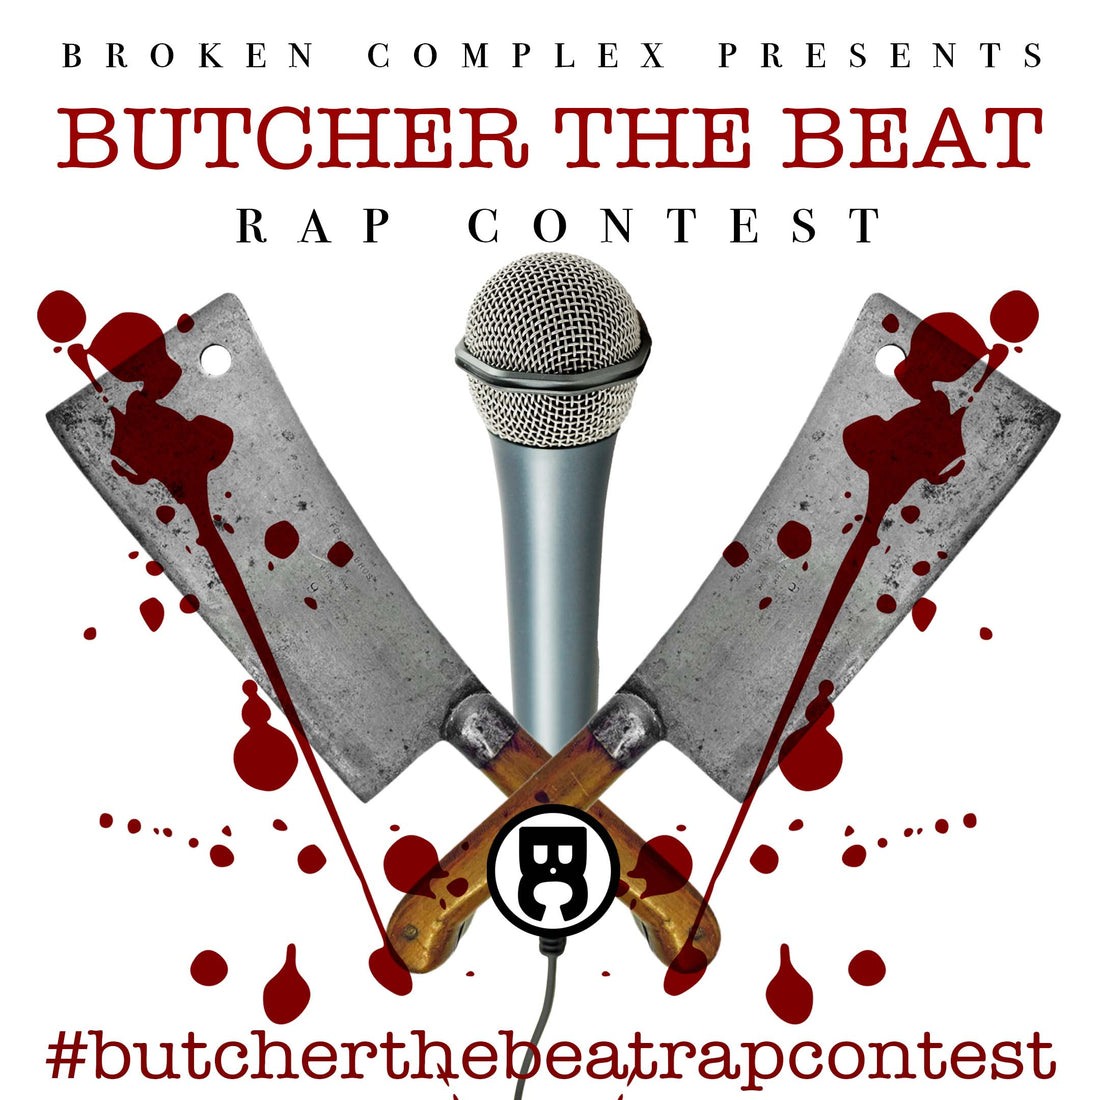 And The Winner Of The #ButcherTheBeatRapContest Is...